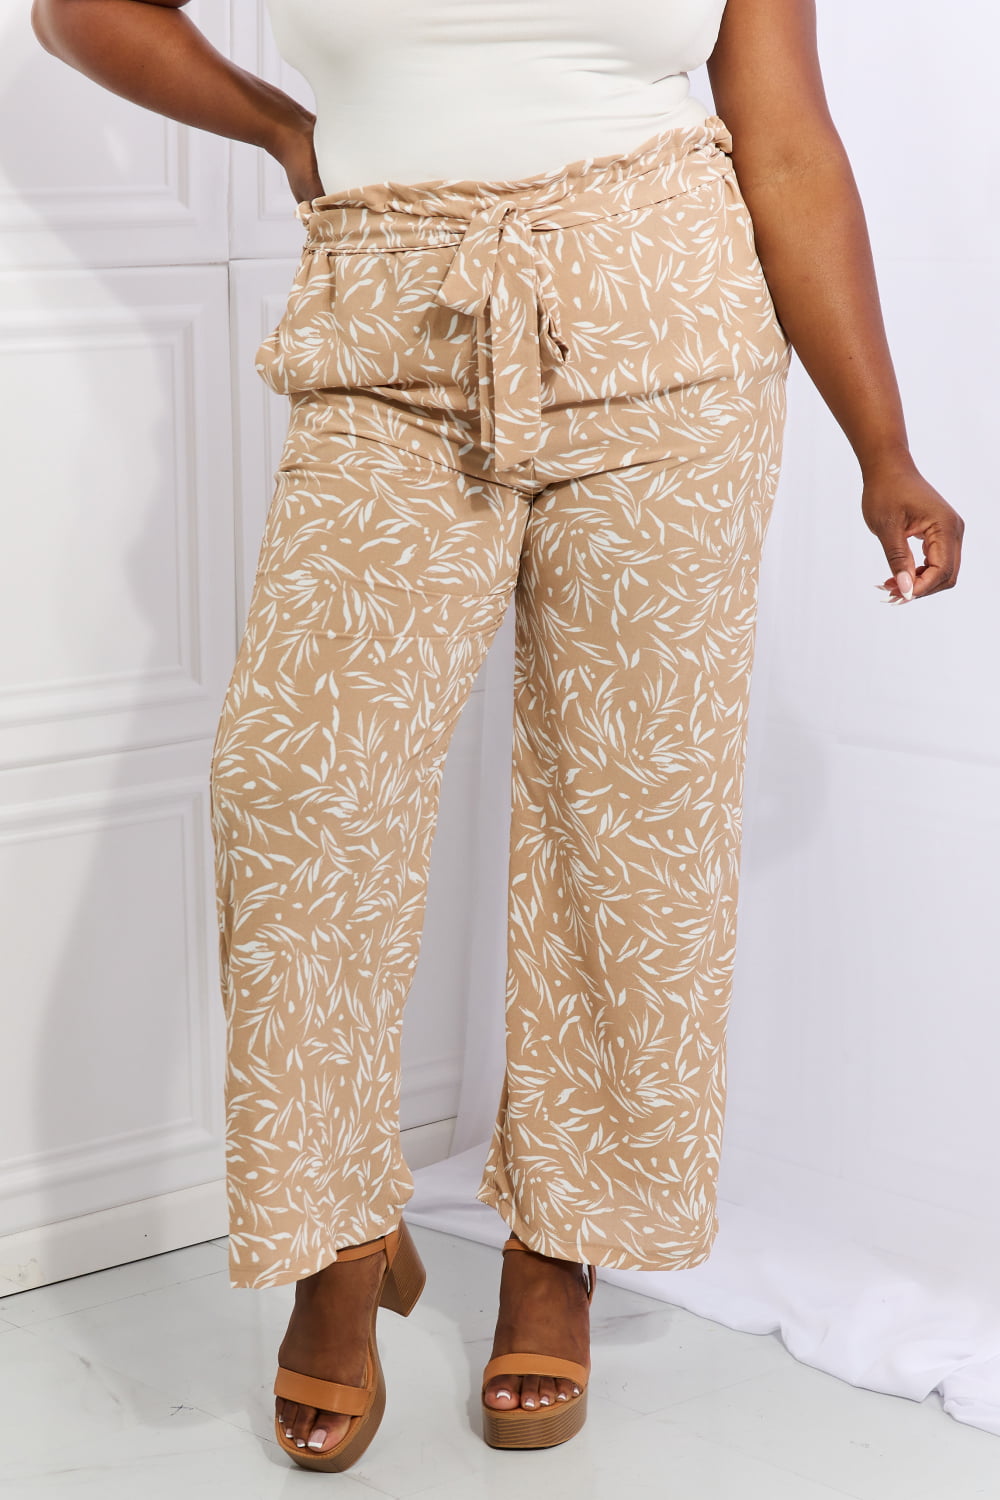 Heimish Right Angle Geometric Printed Pants in Tan - FunkyPeacockStore (Store description)